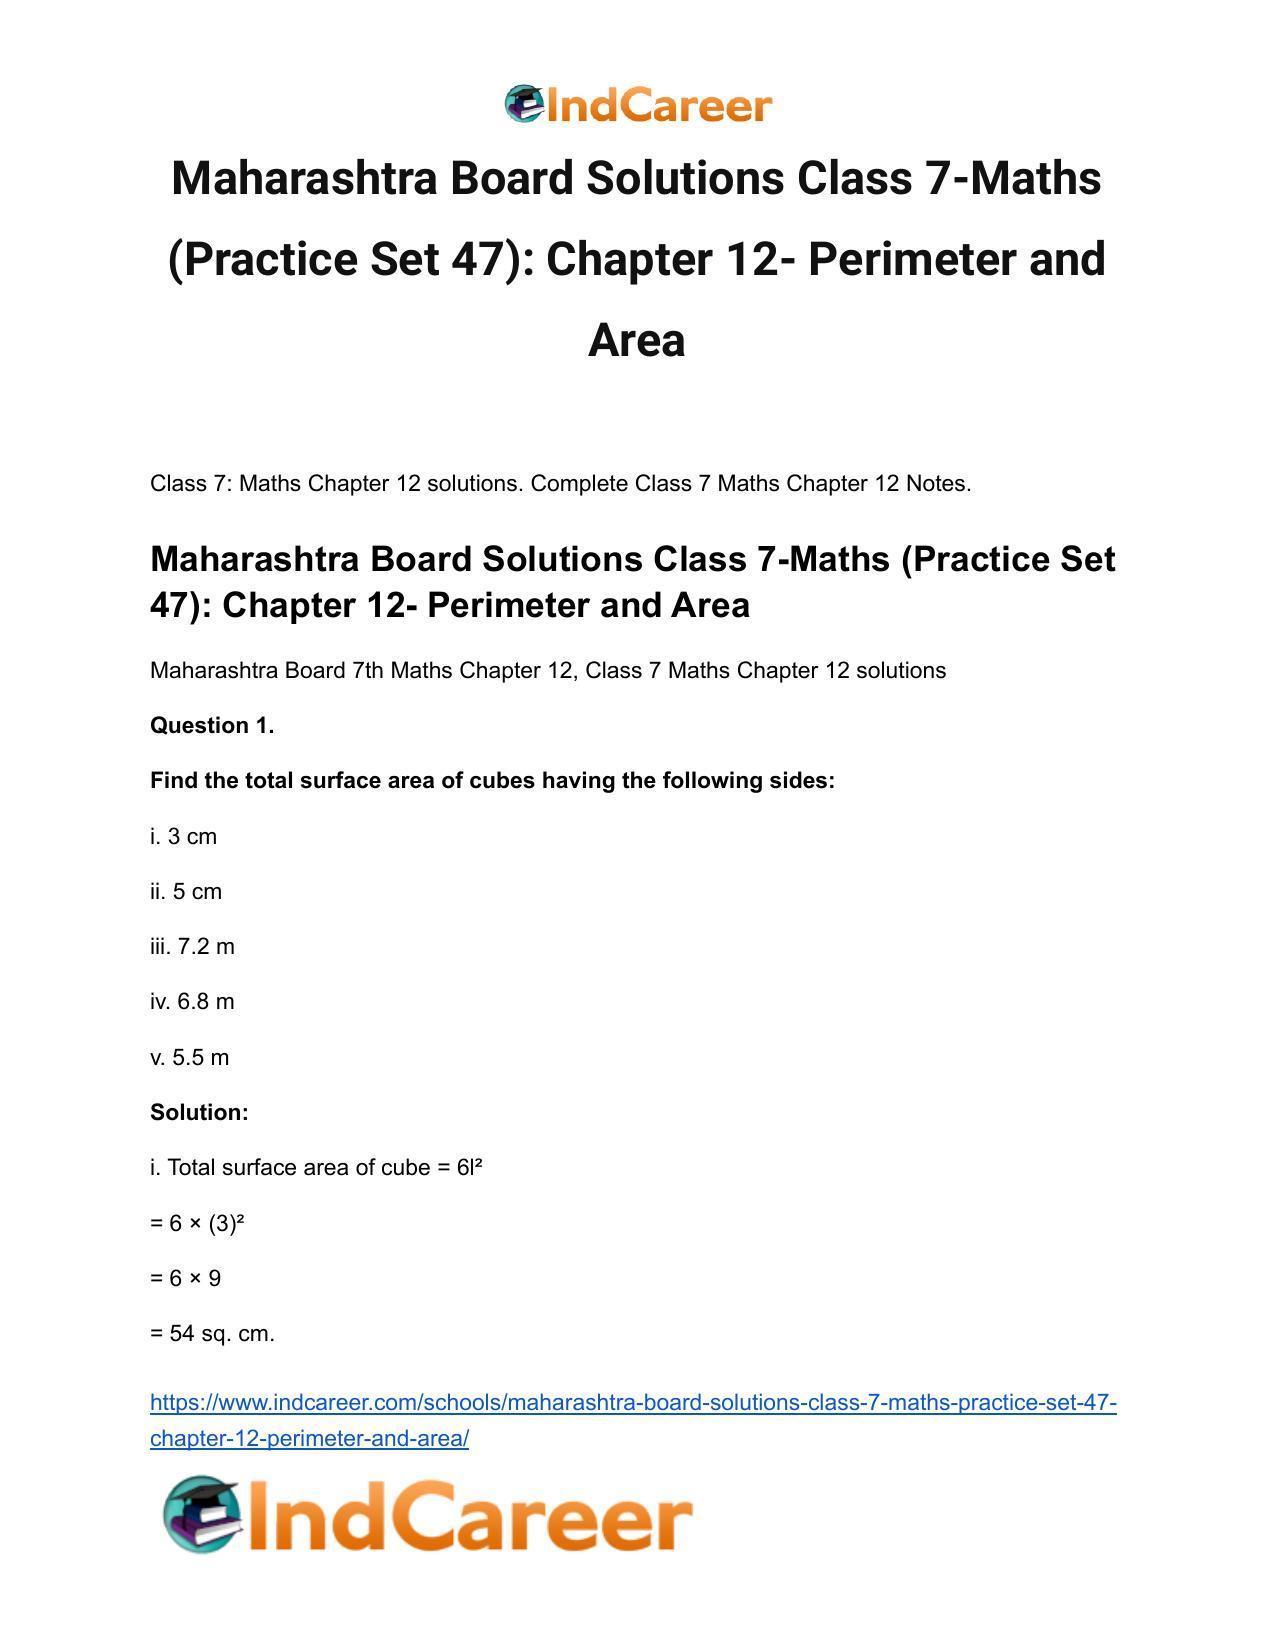 Maharashtra Board Solutions Class 7-Maths (Practice Set 47): Chapter 12- Perimeter and Area - Page 2